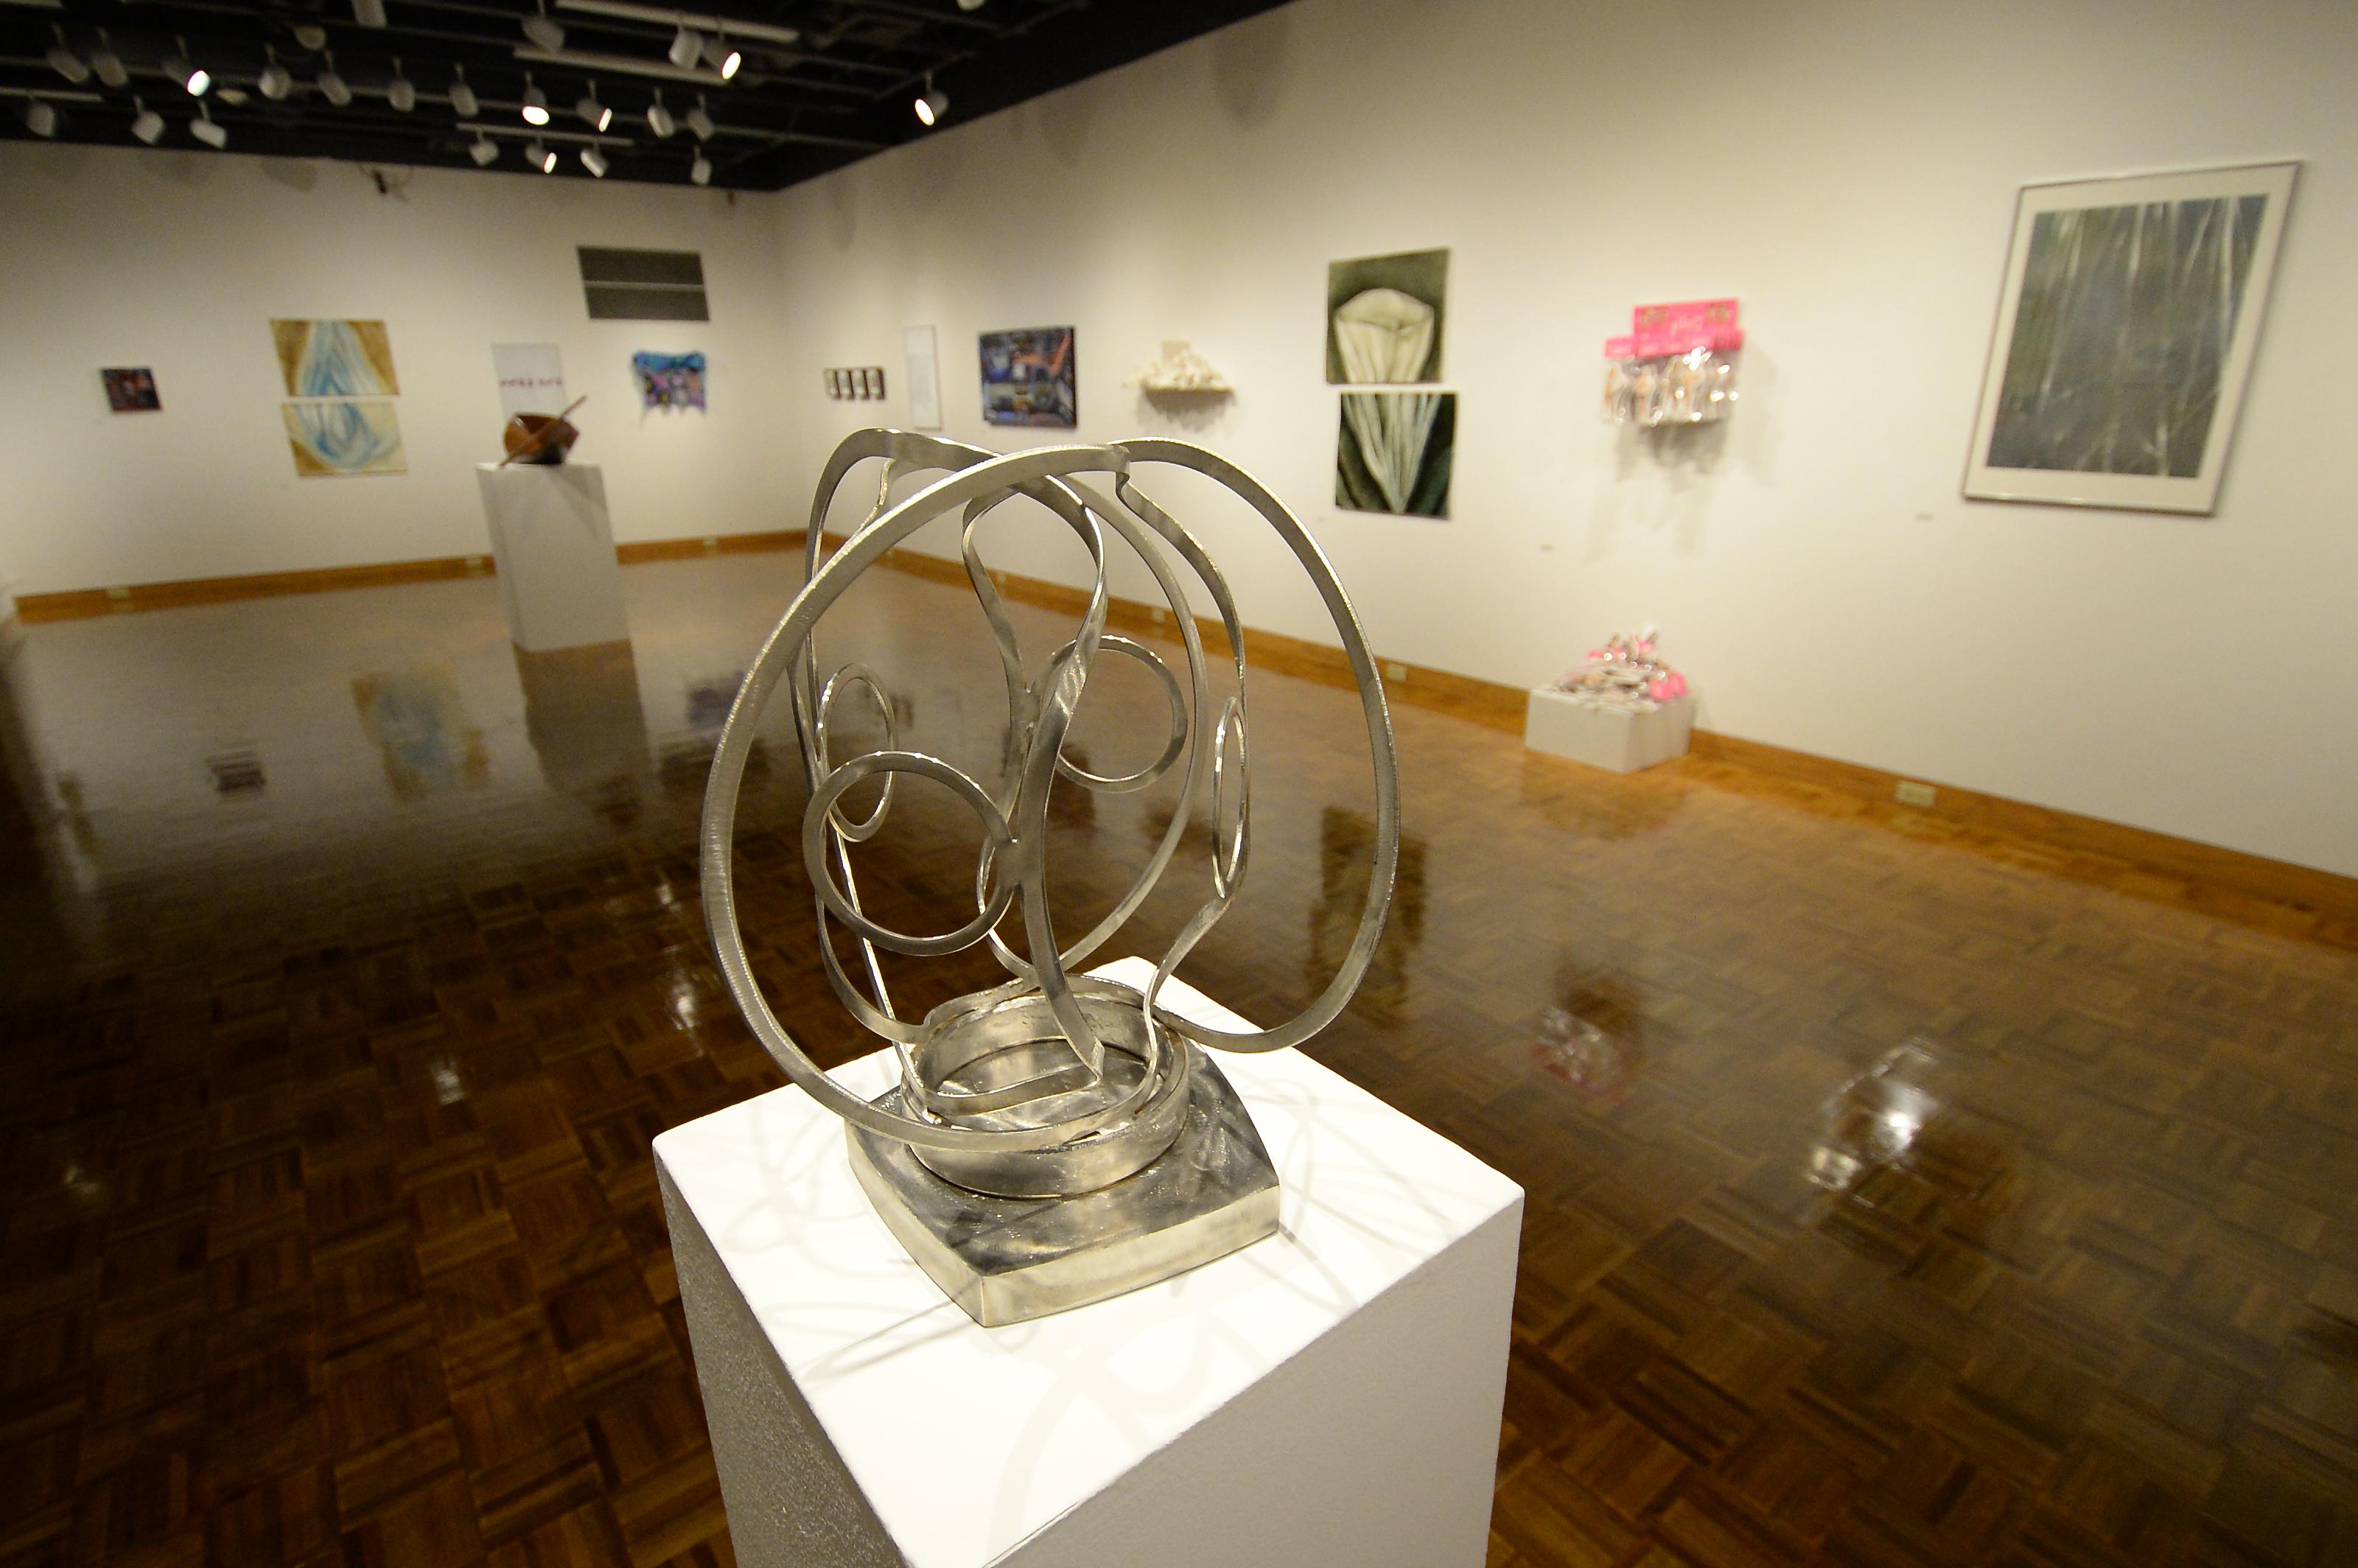 Shircliff gallery faculty exhibition